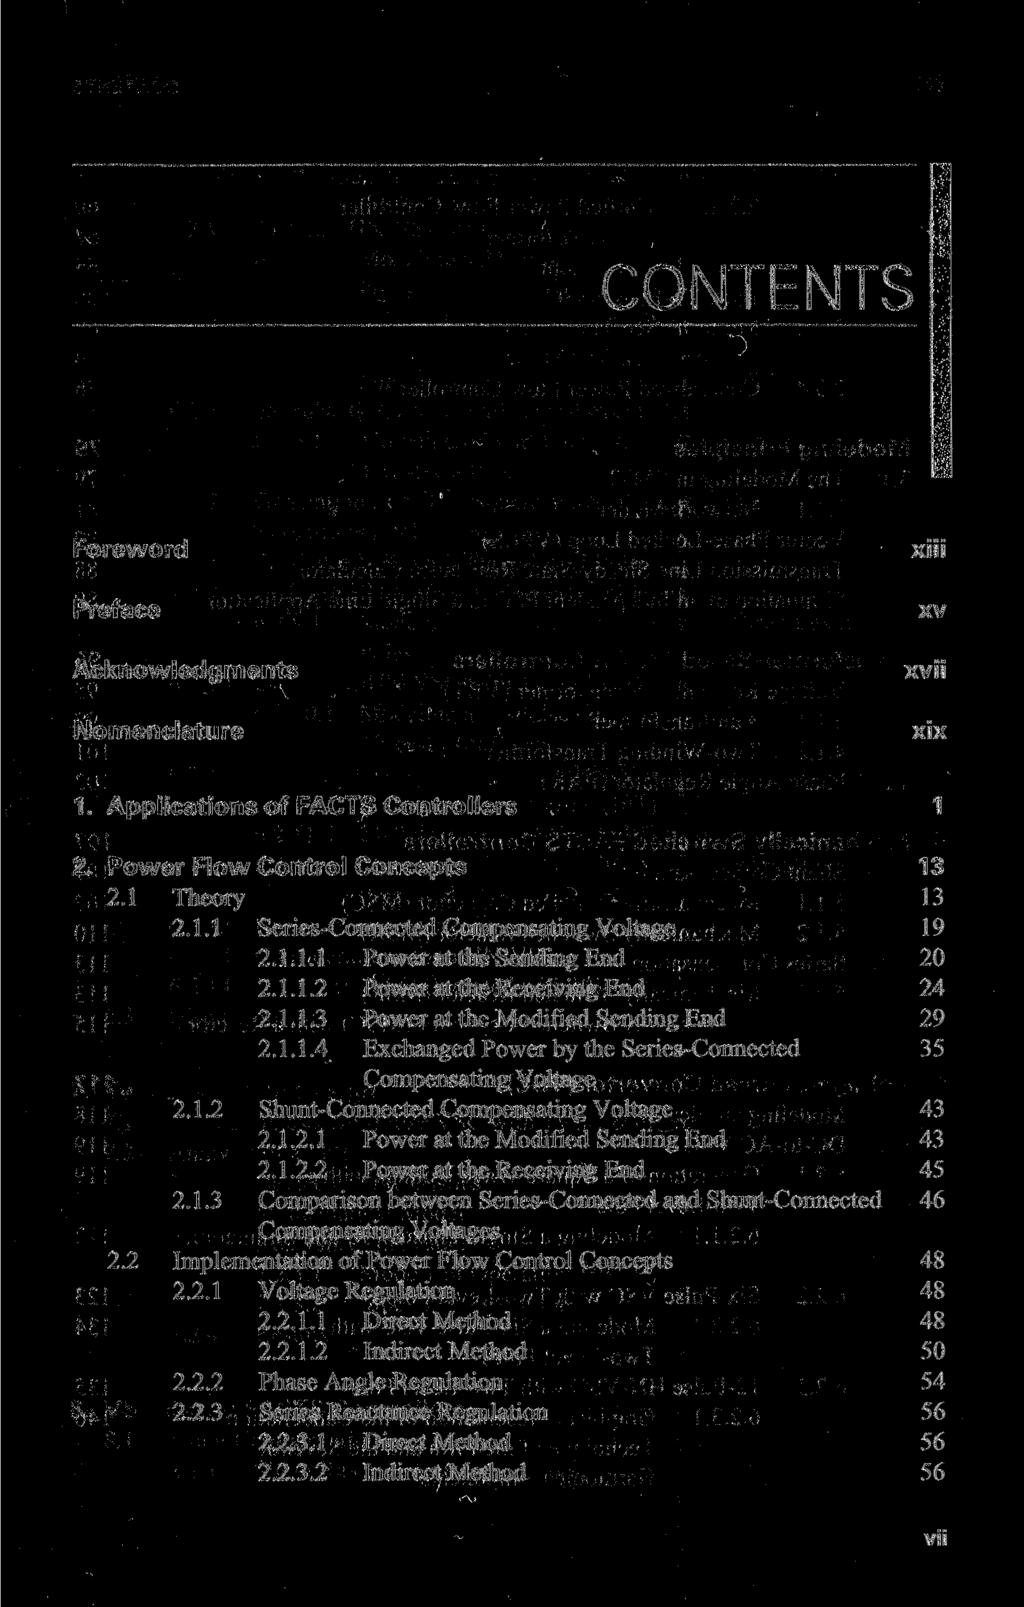 CONTENTS Foreword Preface Acknowledgments Nomenclature xiii xv xvii xix 1. Applications of FACTS Controllers 1-2. Power Flow Control Concepts 13 2.1 Theory 13 2.1.1 Series-Connected Compensating Voltage 19 2.